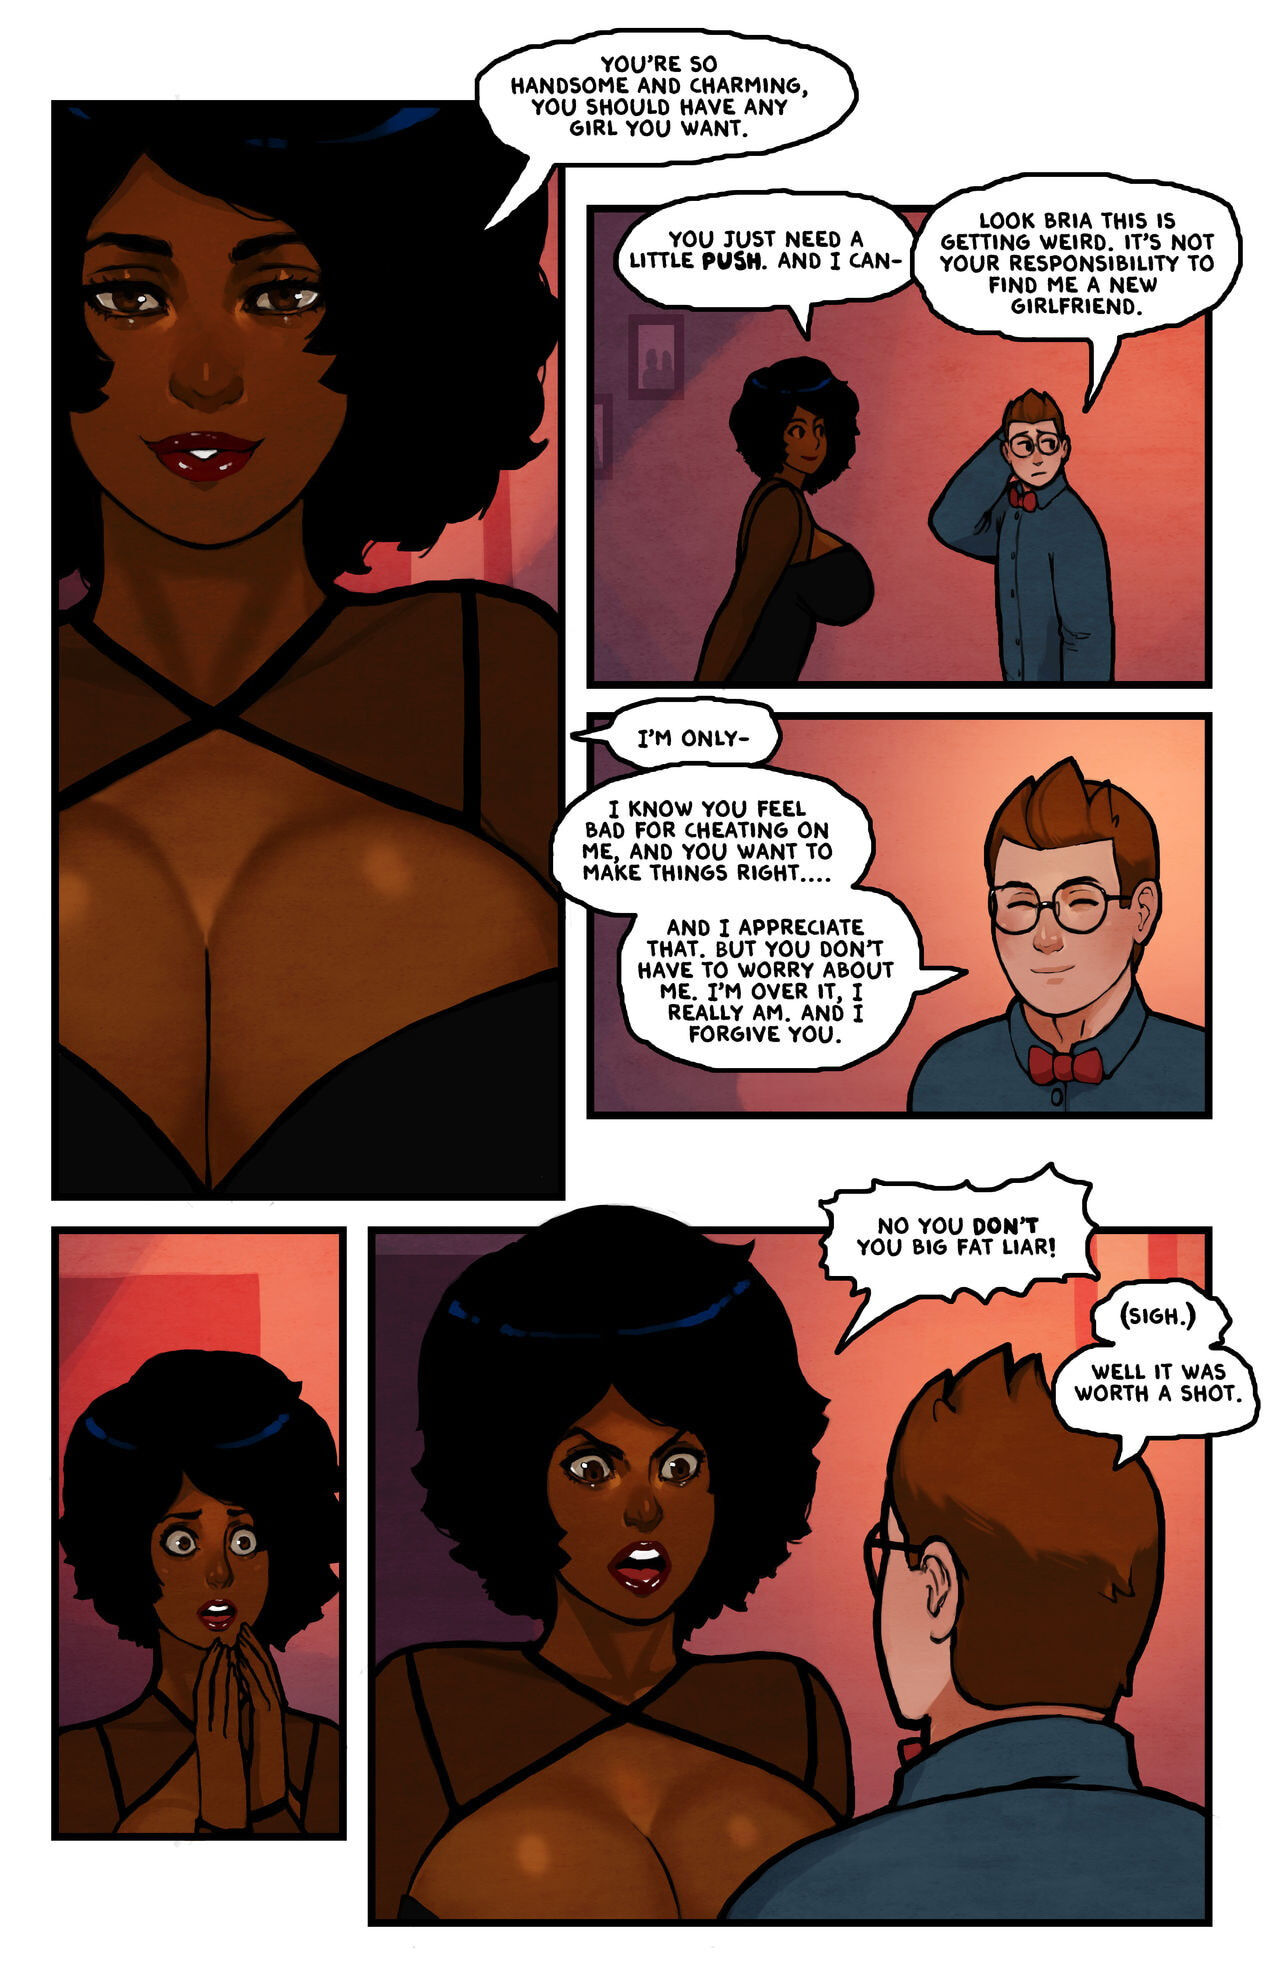 This Romantic World - Page 84